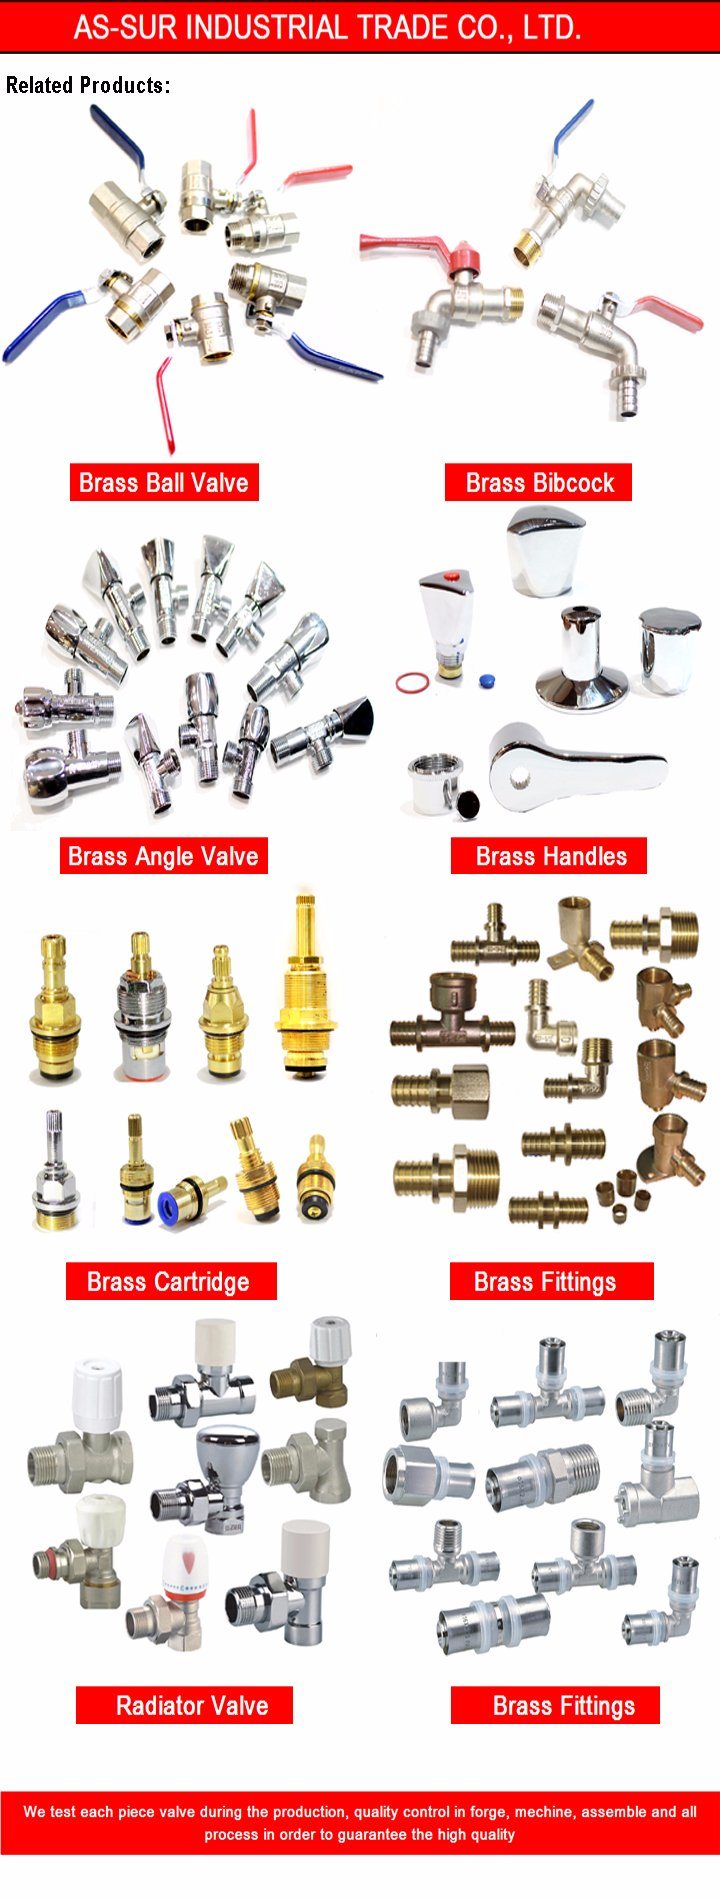 Harbed Hose Fitting, Brass Pipe Fitting, Plumbing Fitting and Tube Fitting